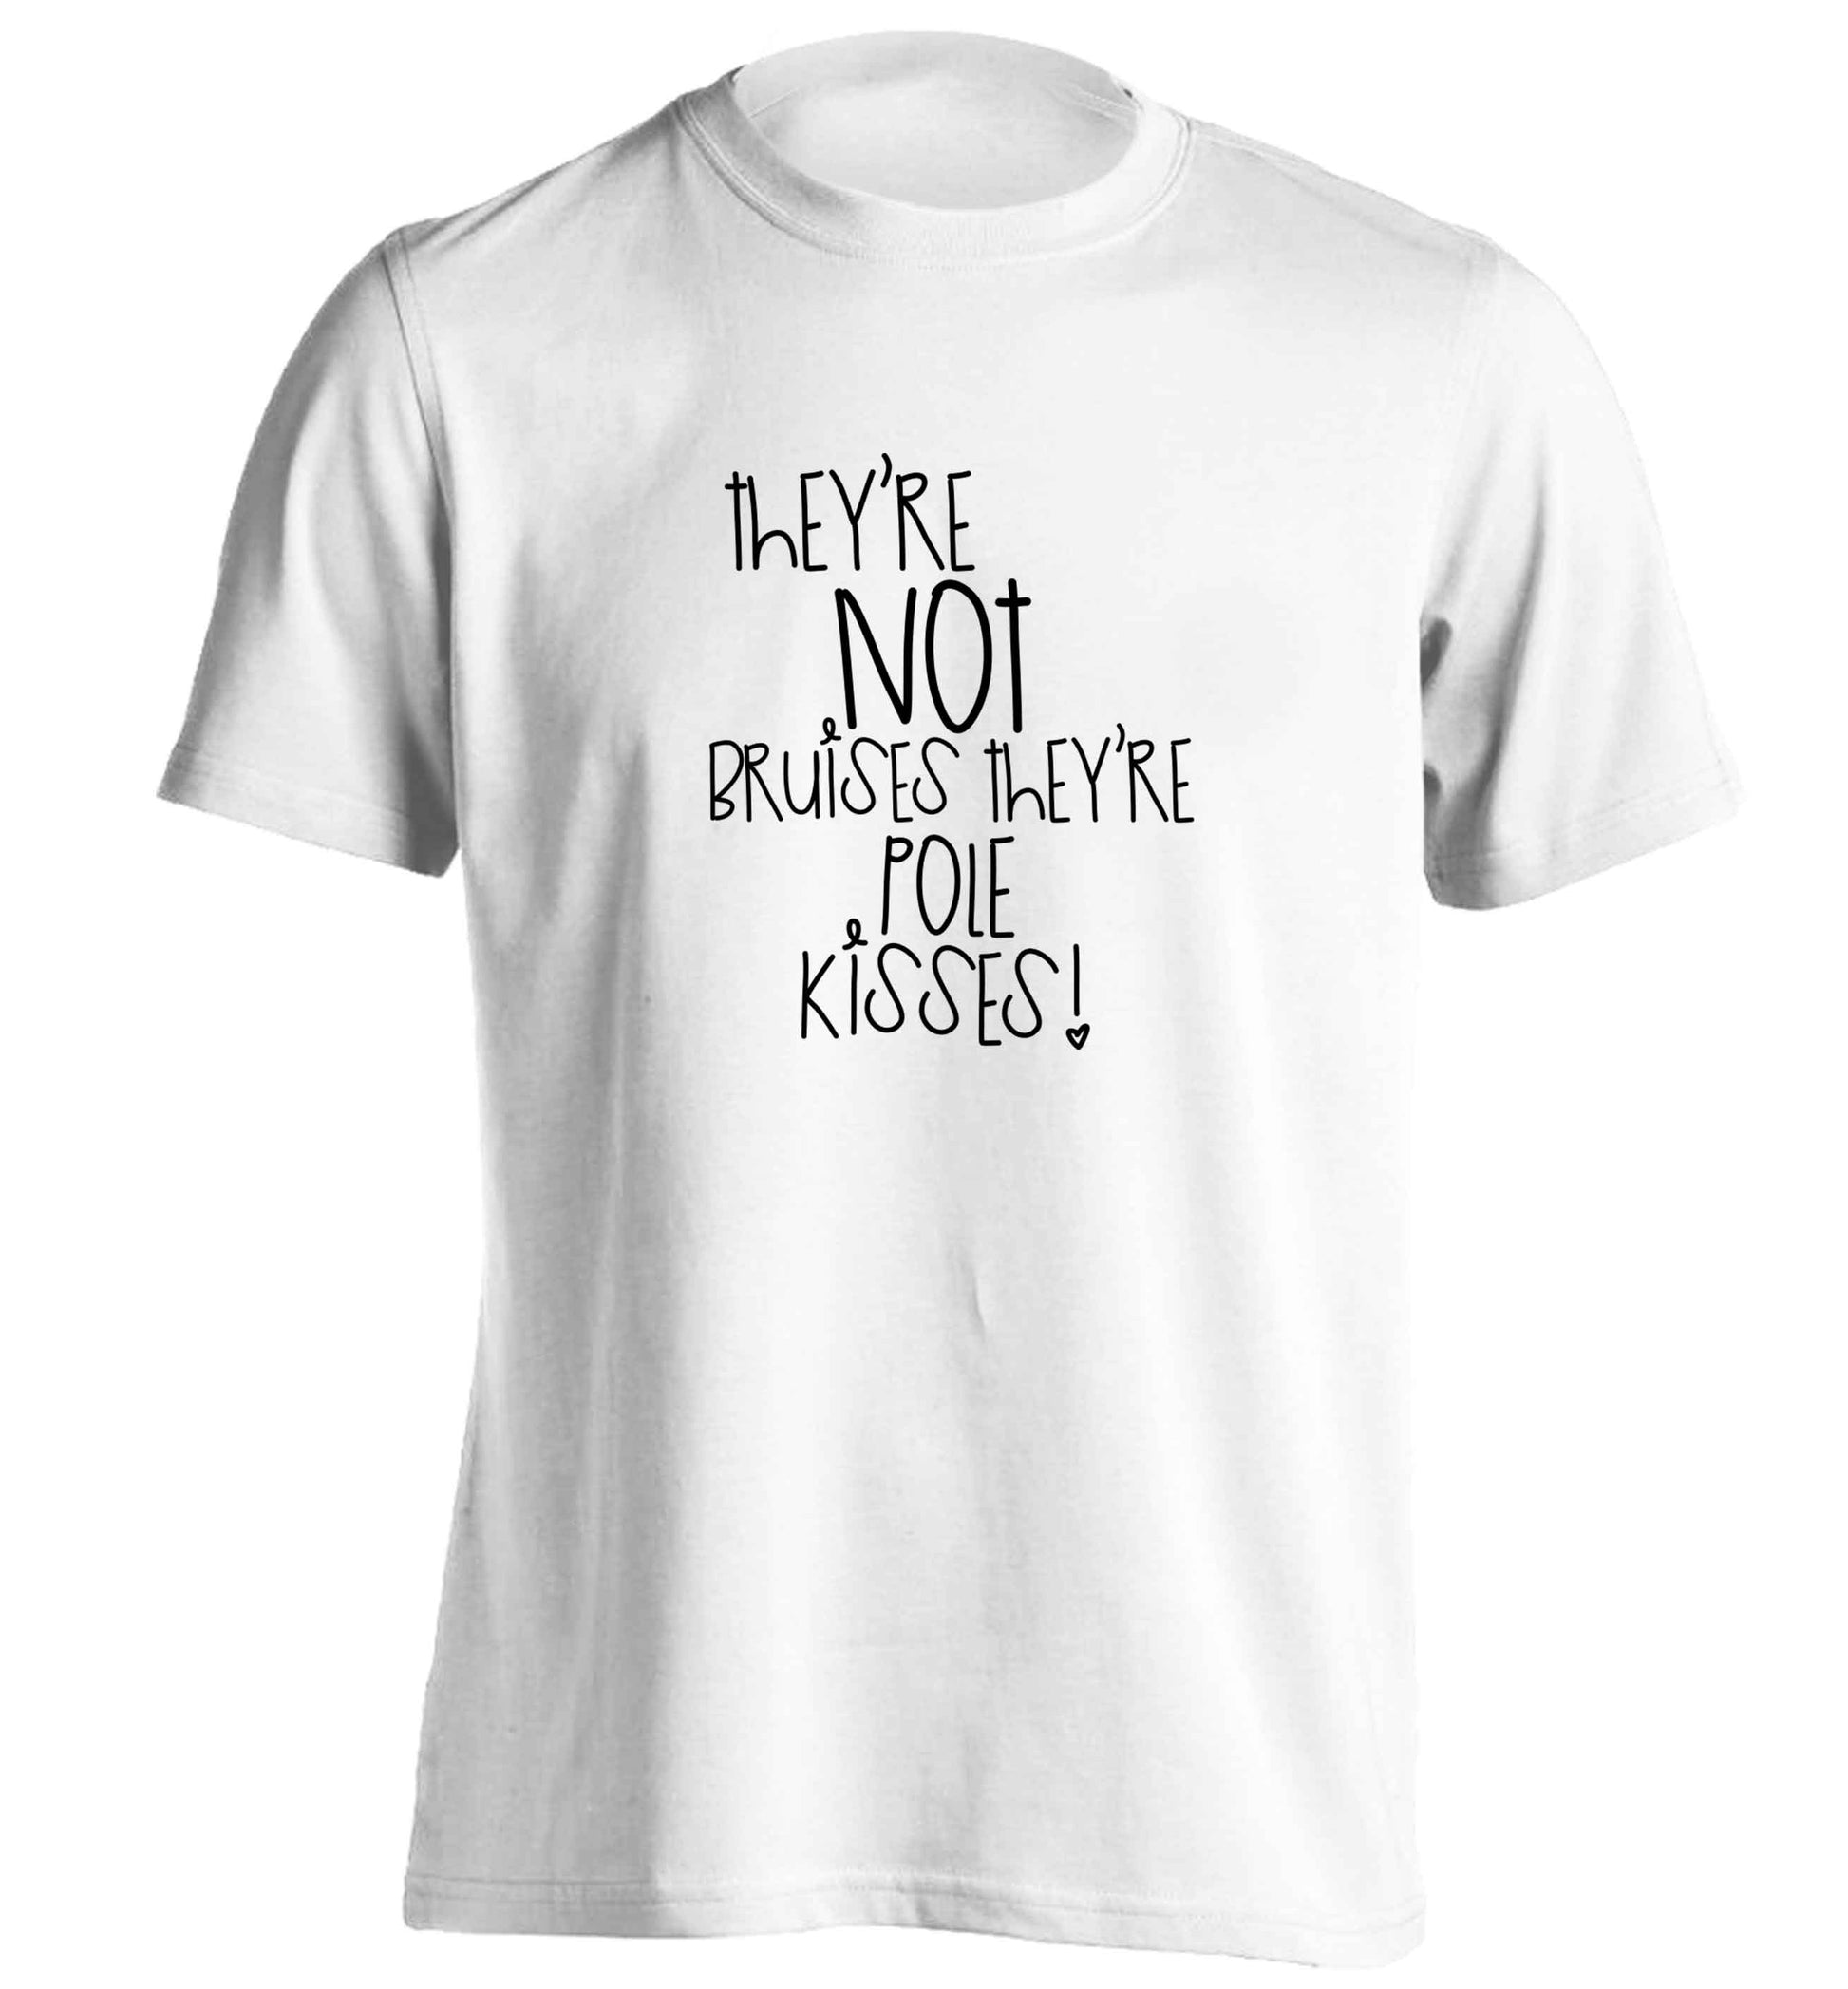 They're not bruises they're pole kisses adults unisex white Tshirt 2XL